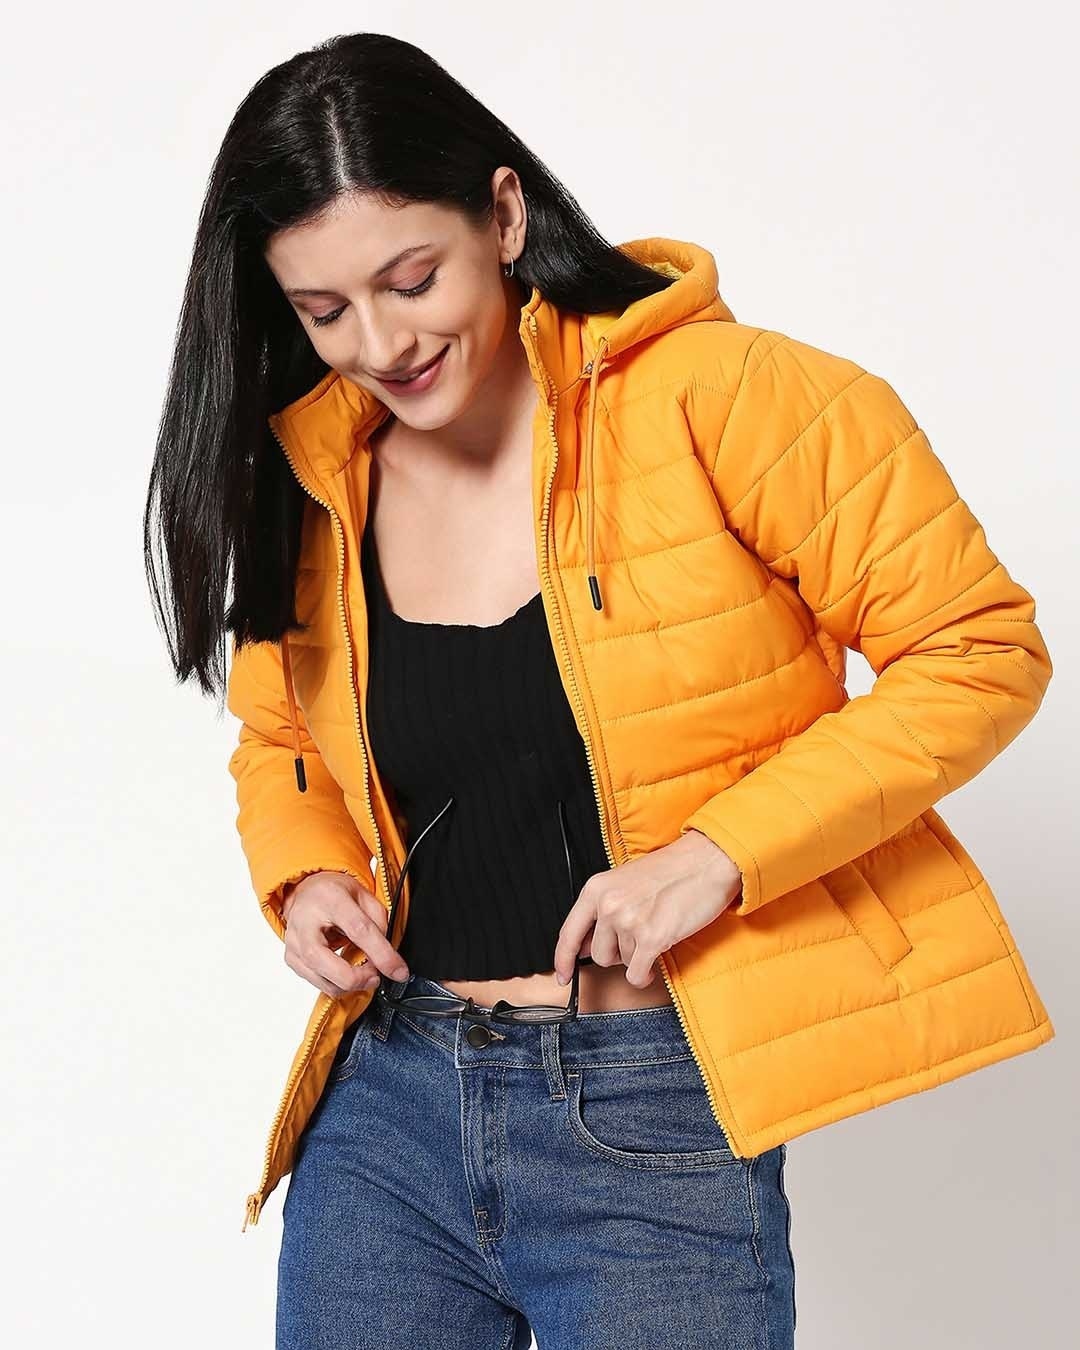 Women's Coldfront Down Jacket | Outdoor Research